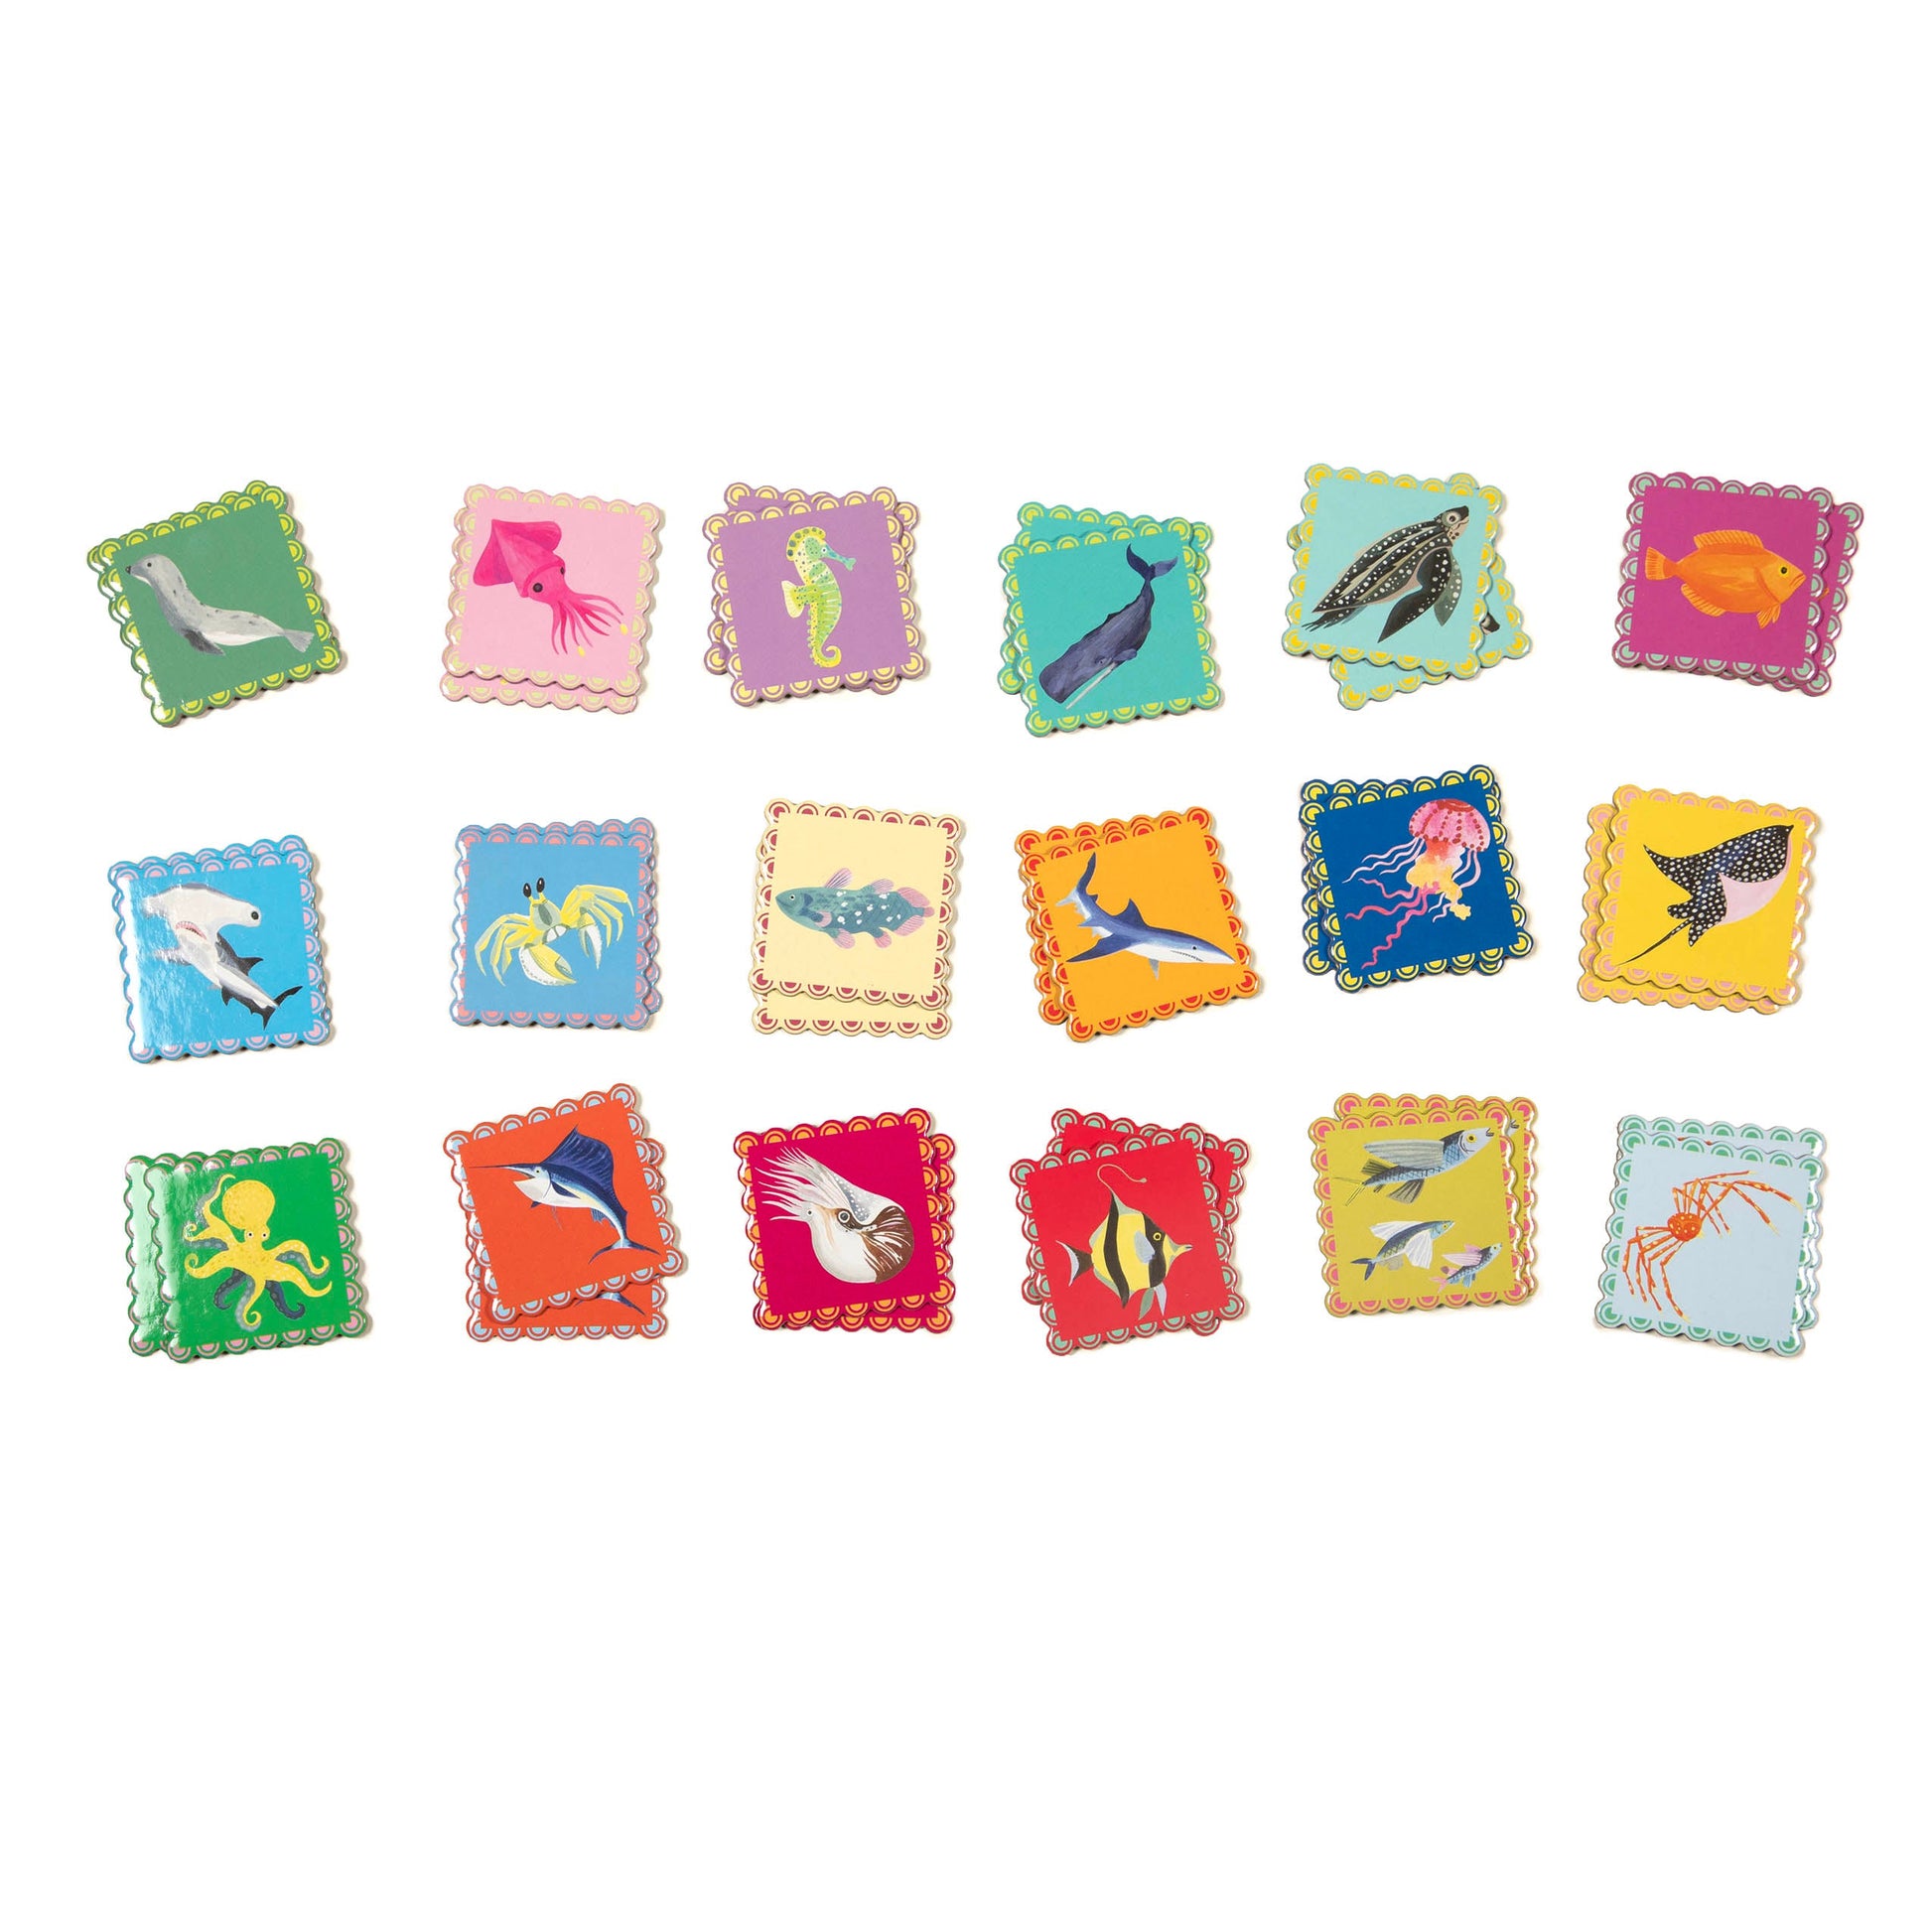 Sea Animals Little Square Memory Matching Game | Unique Shark Gifts for Ages 3+ | Find sharks, squids, fish, whales, and more